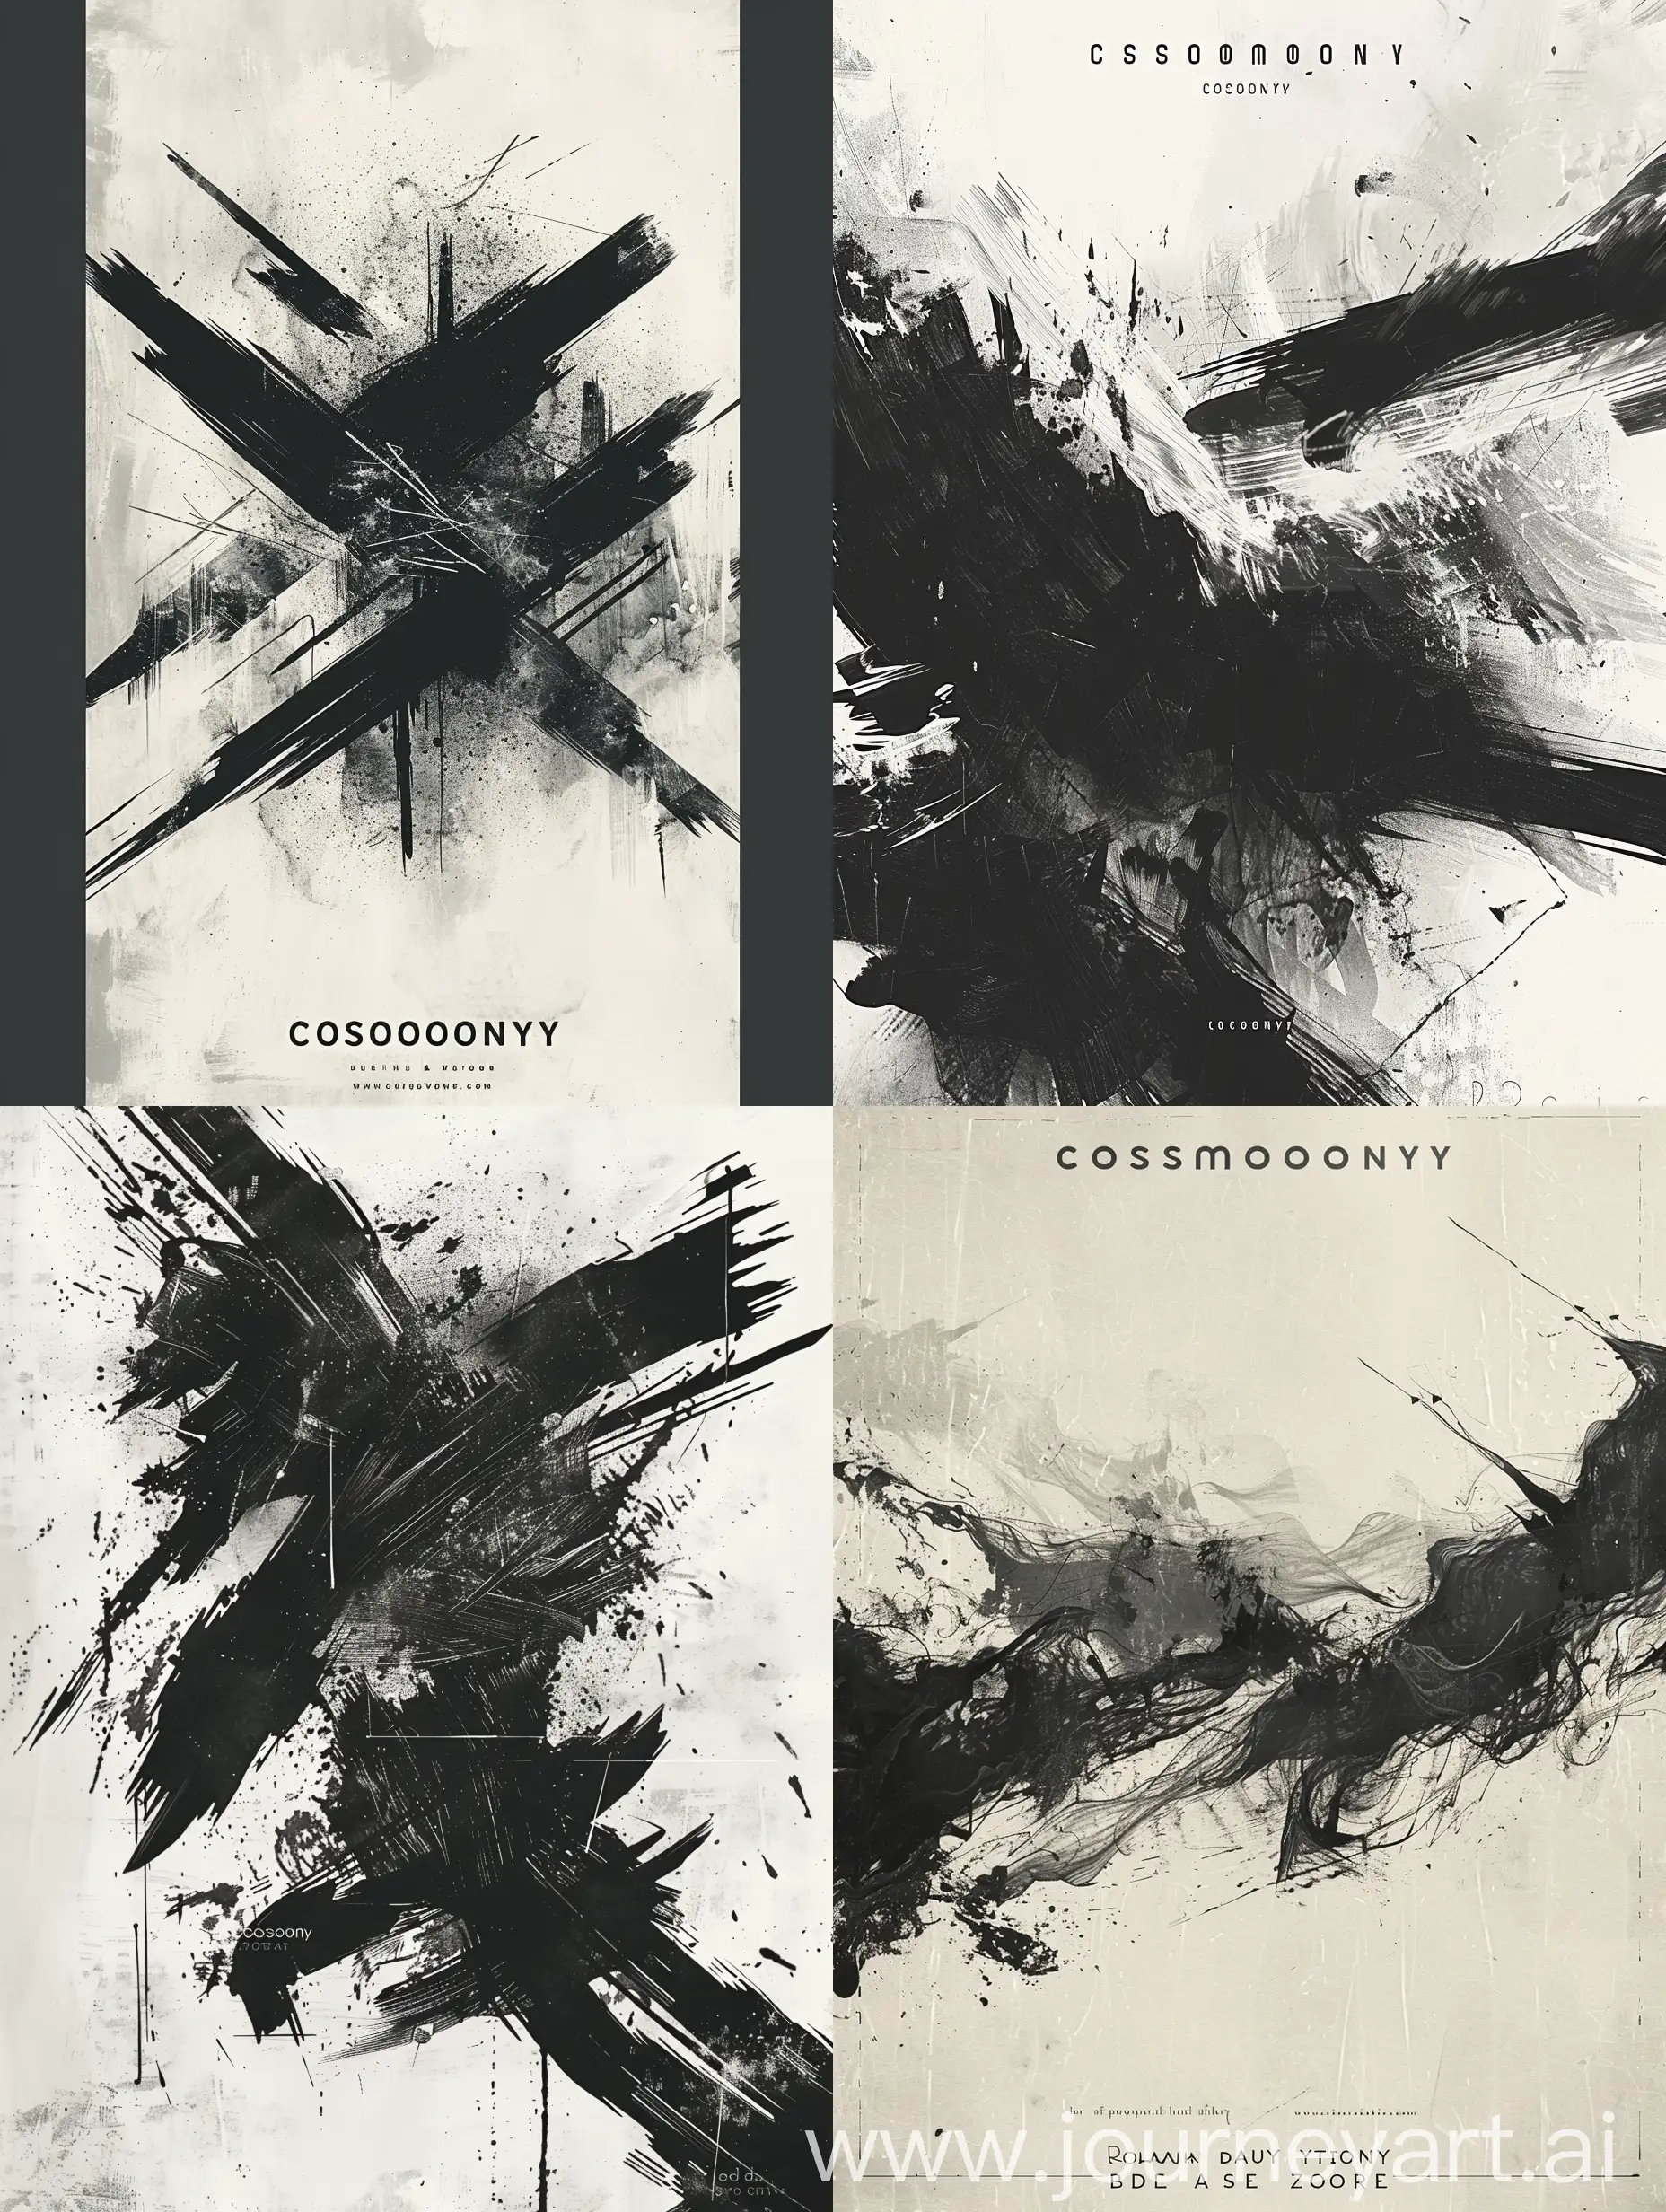 Book Cover Design 'Cosmogony' -  a startlingly bold abstract design, a few broad strokes in black ink illustrating the awe and dread of the world; with  modern fonts for contrast